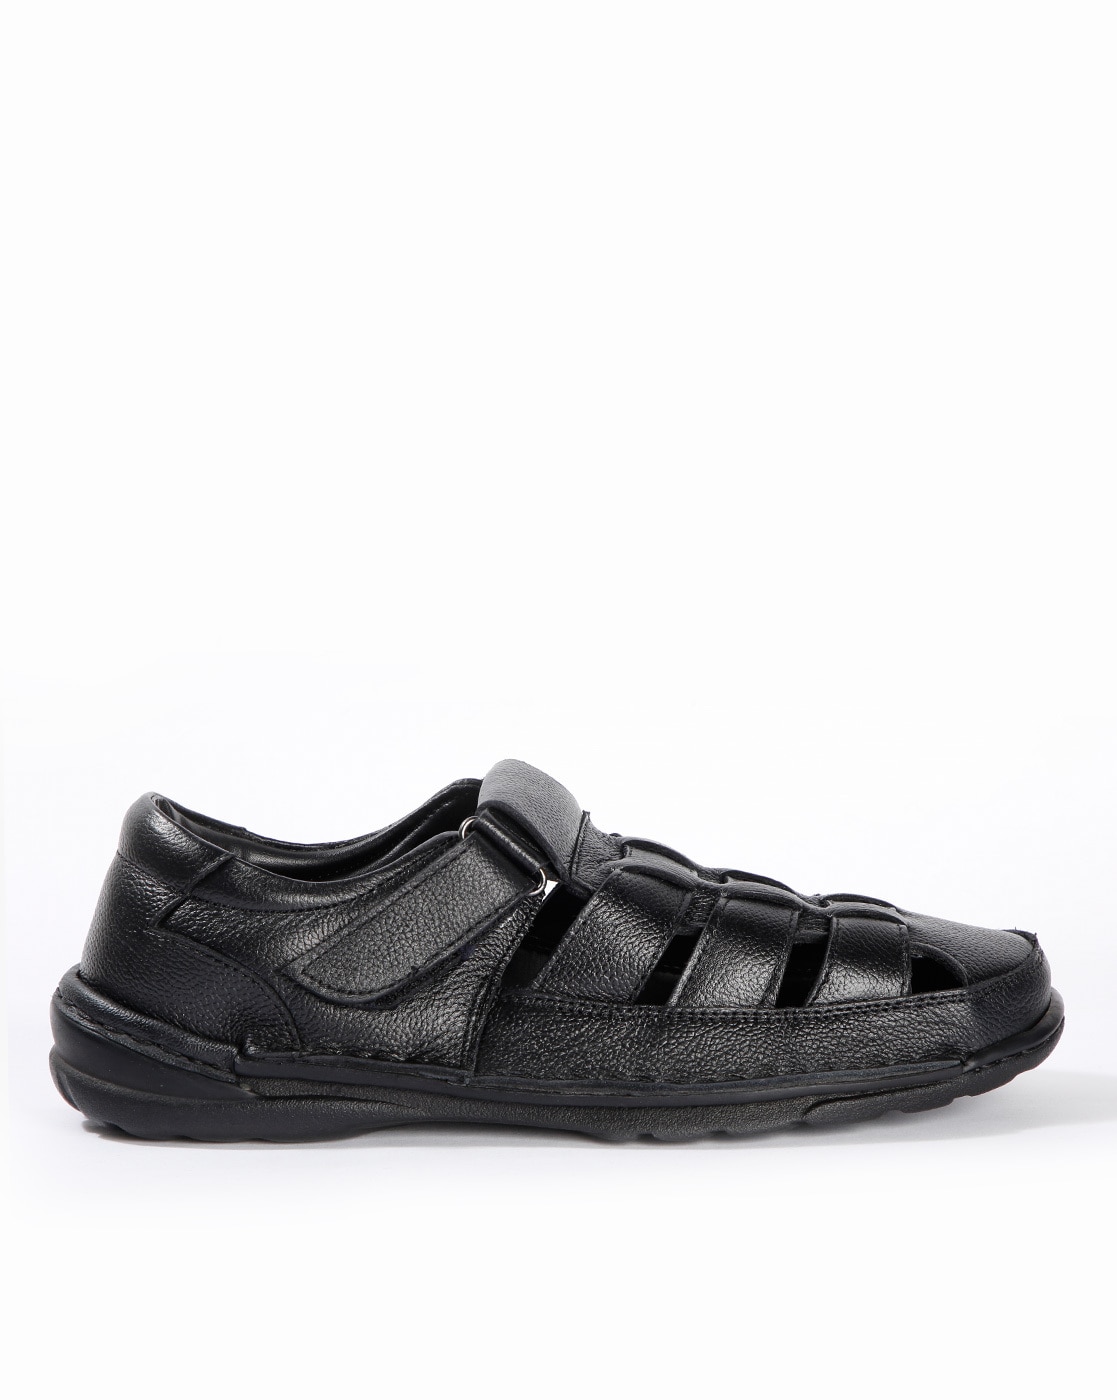 Buy Black Sandals for Men by LIBERTY 